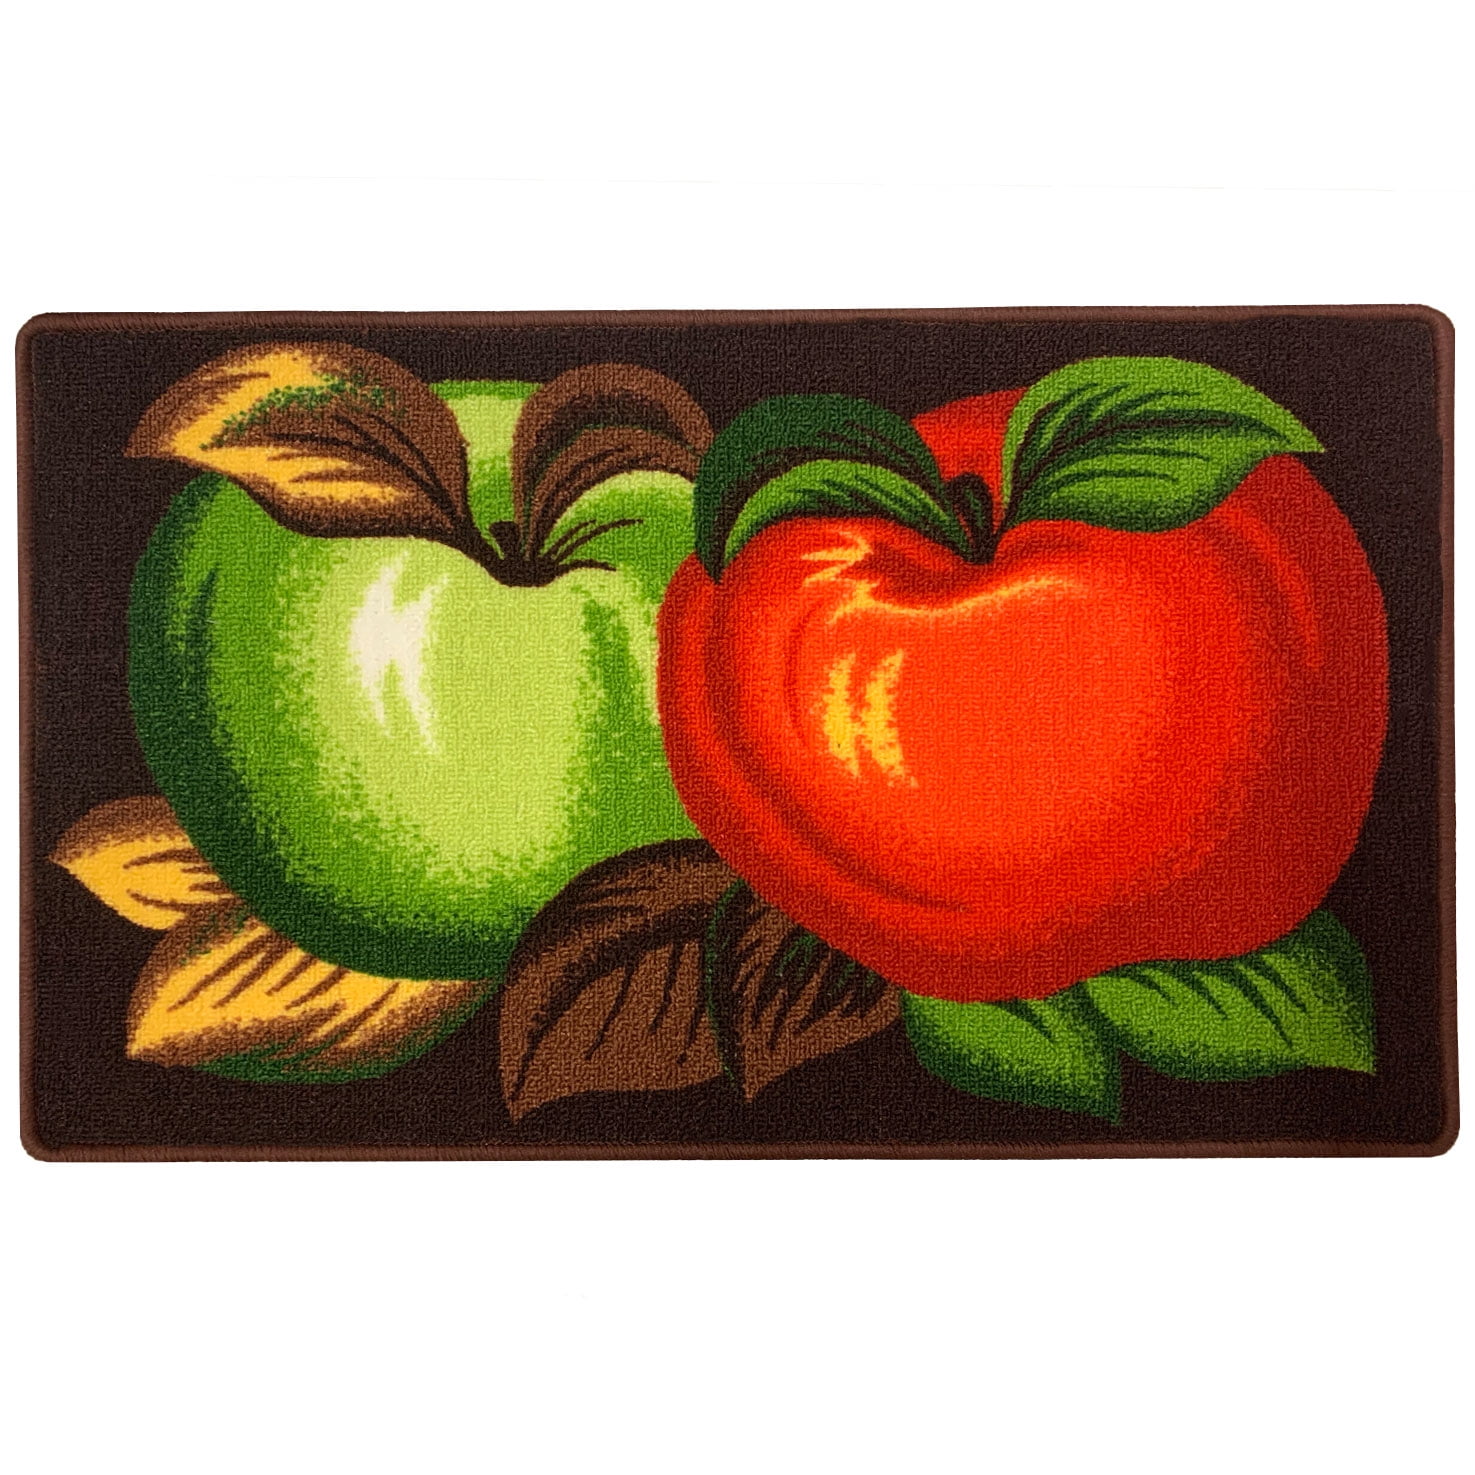 Mixed Apples Kitchen Rug 